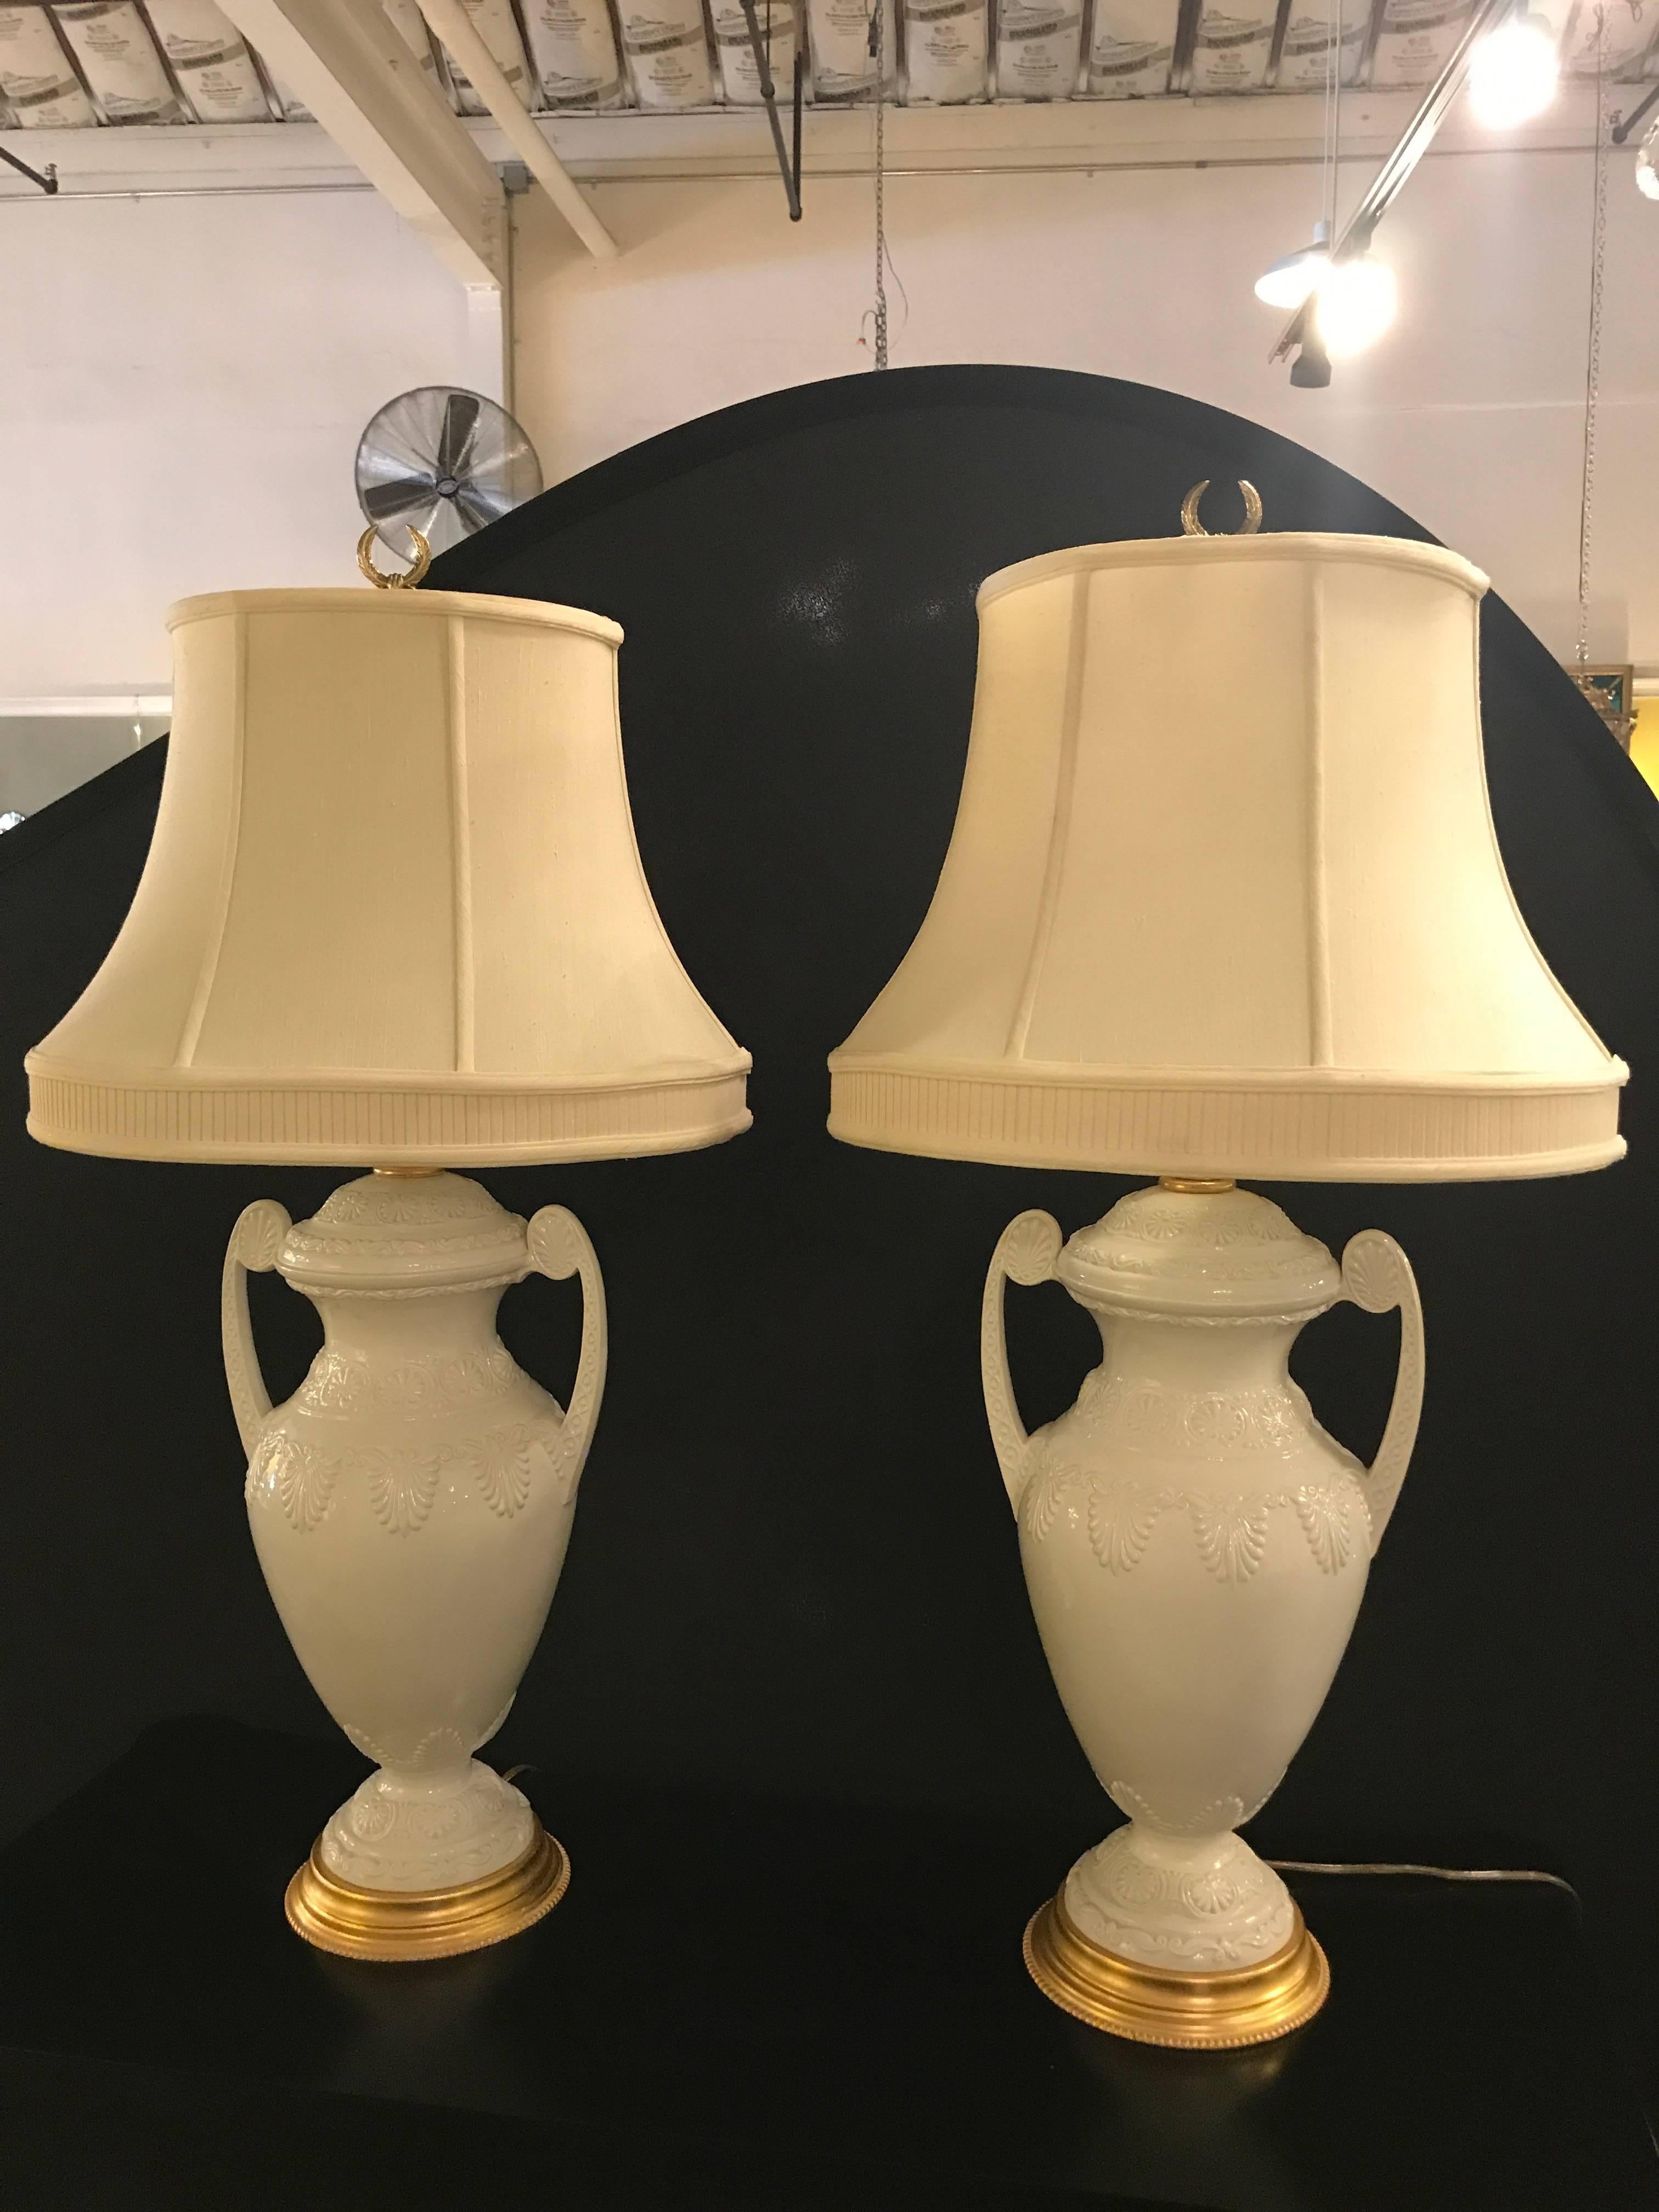 20th Century Pair of Lenox Neoclassical Style Table Lamps by Frederick Cooper